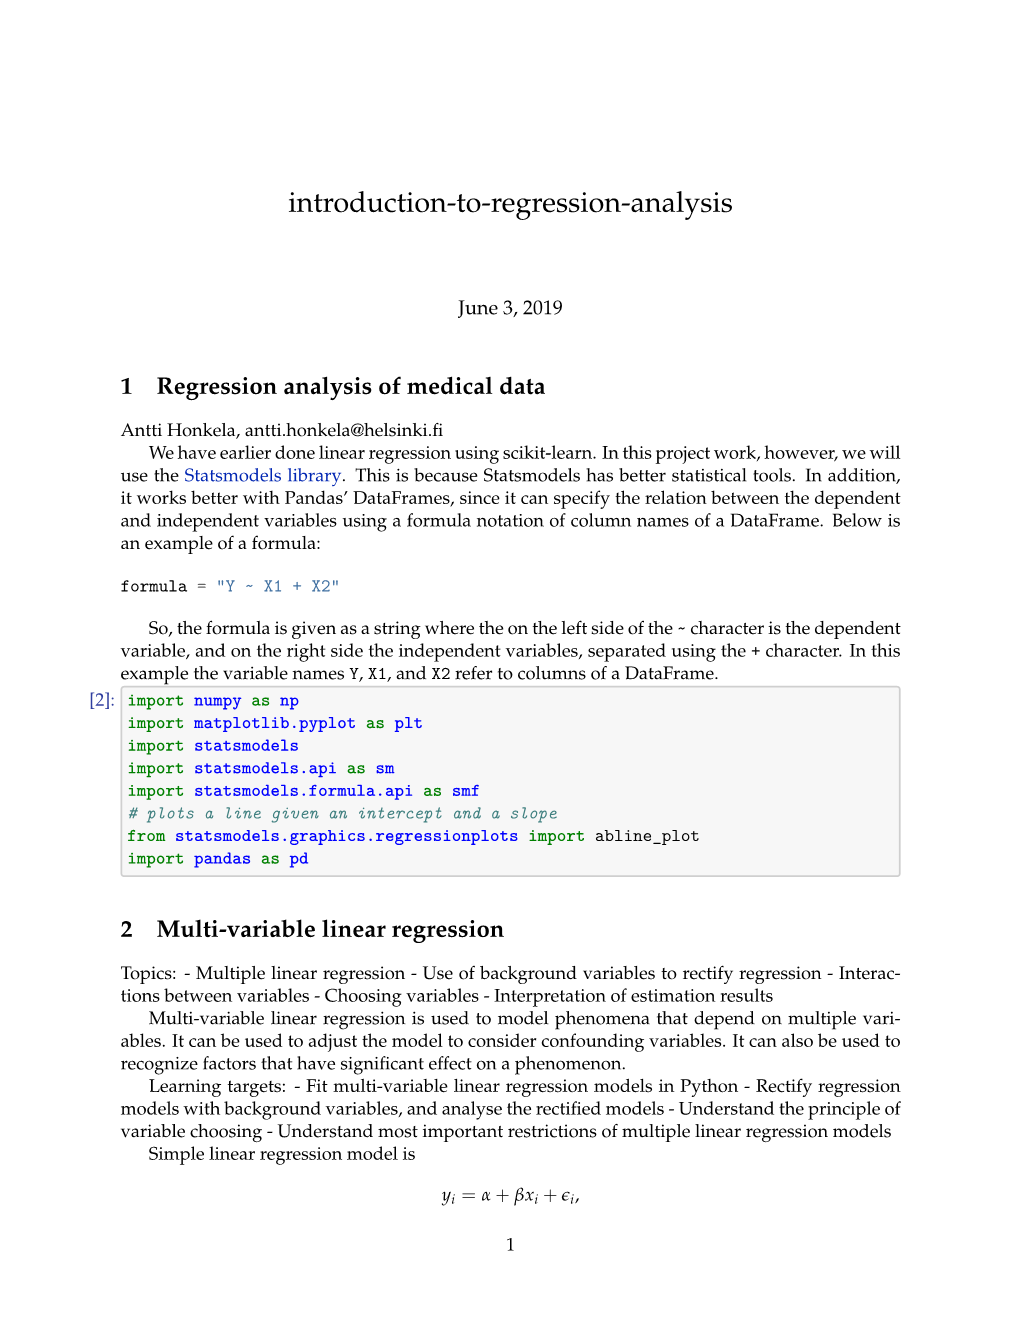 Introduction to Regression Analysis Project